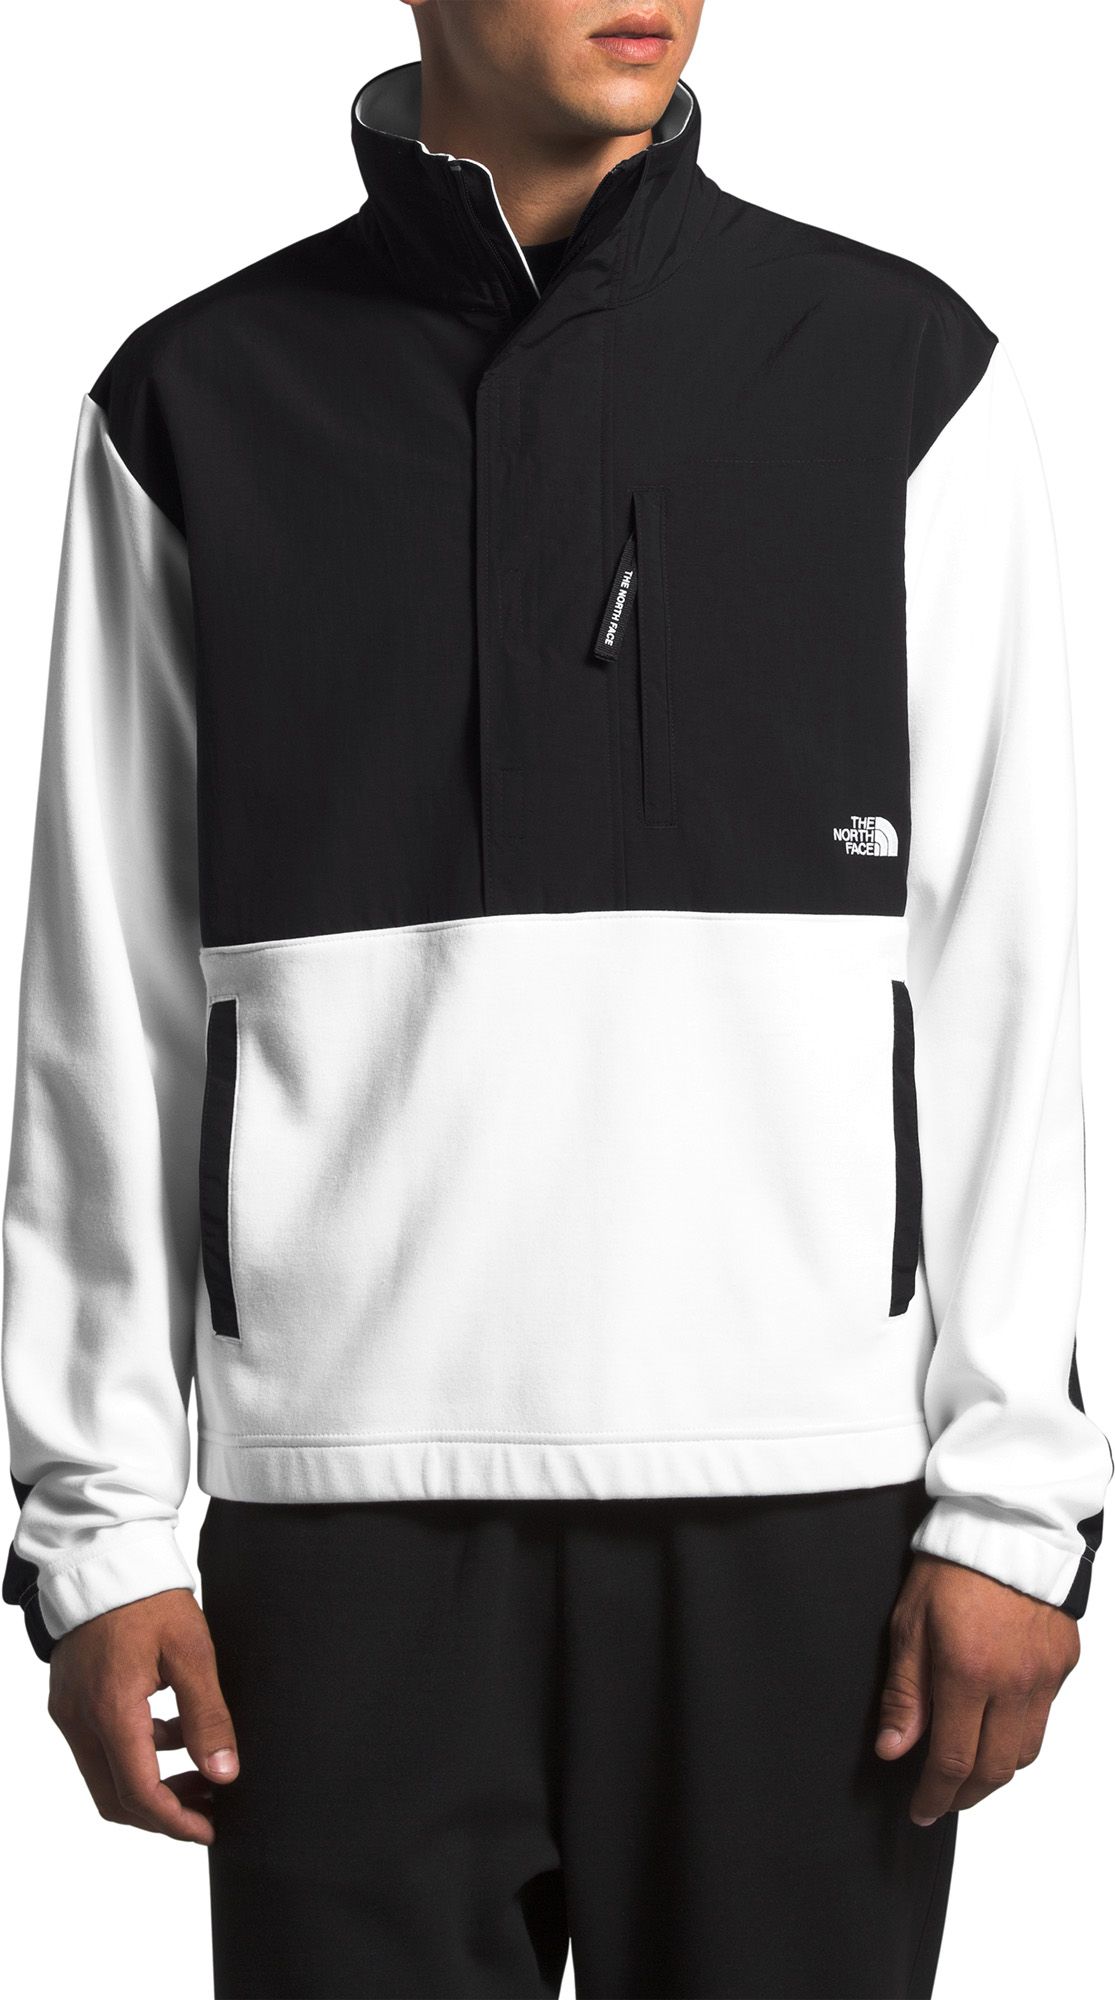 The North Face Men's Graphic Collection Pullover Jacket - .40